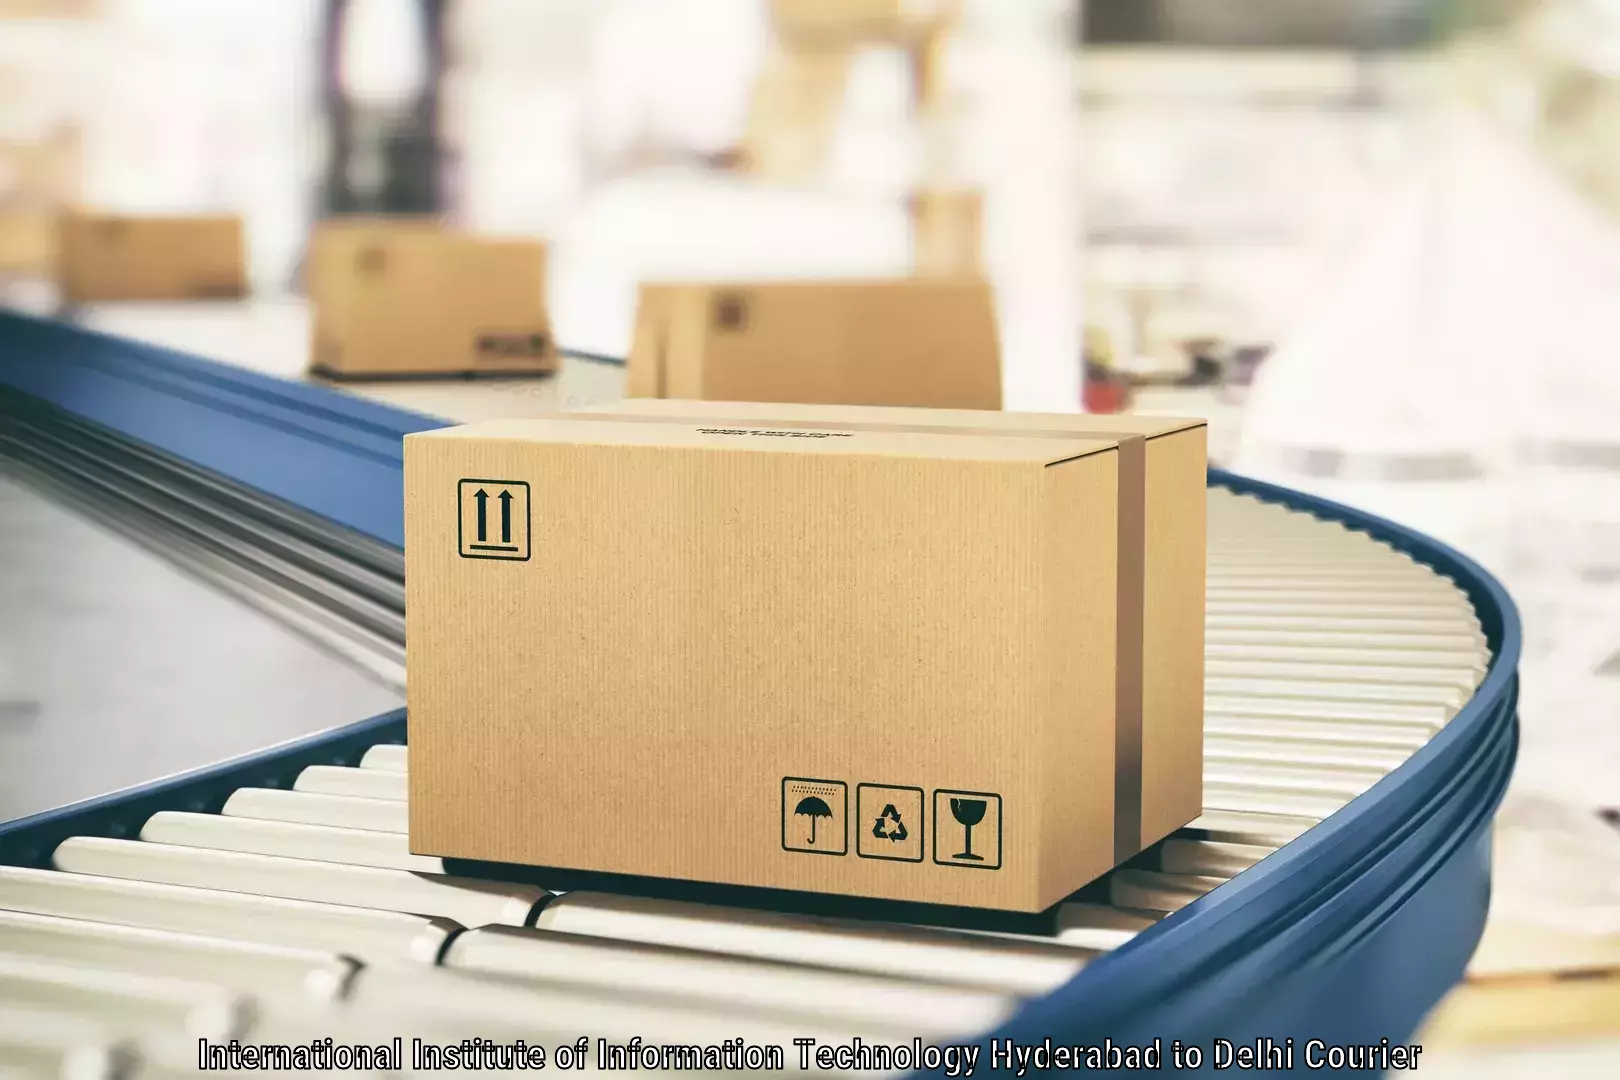 Large package courier International Institute of Information Technology Hyderabad to Subhash Nagar